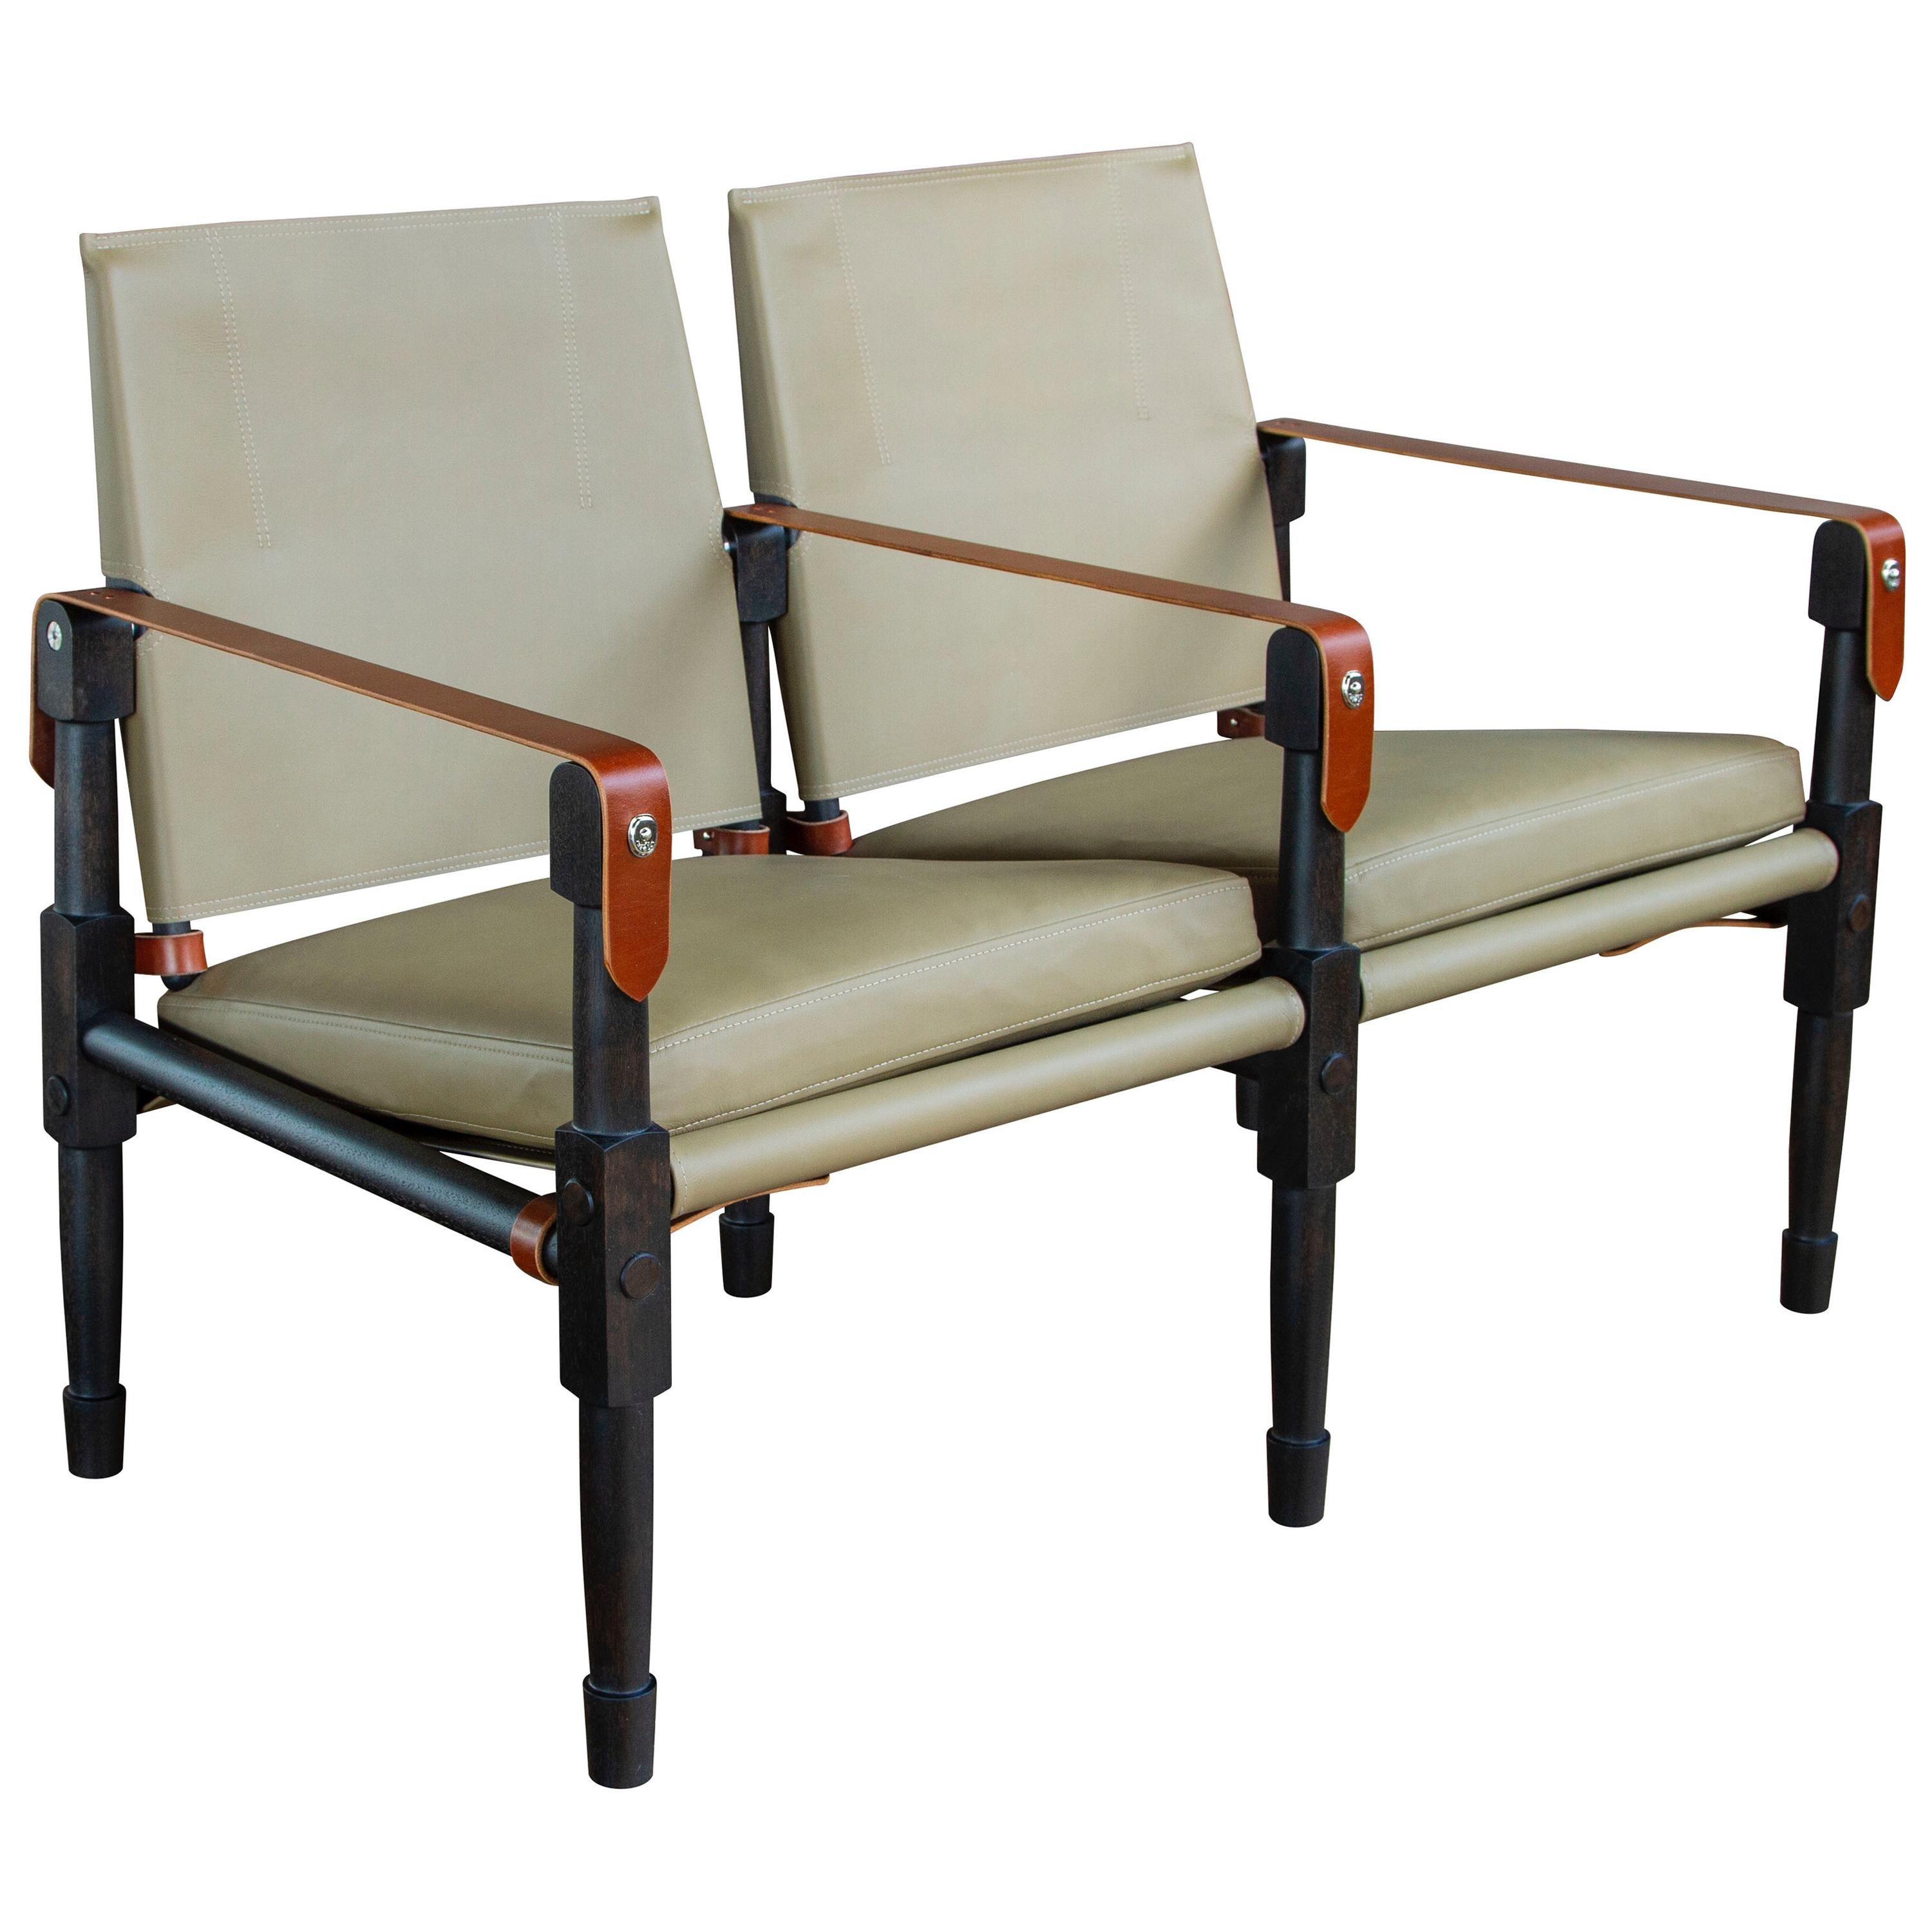 Chatwin Lounge Settee - handcrafted by Richard Wrightman Design